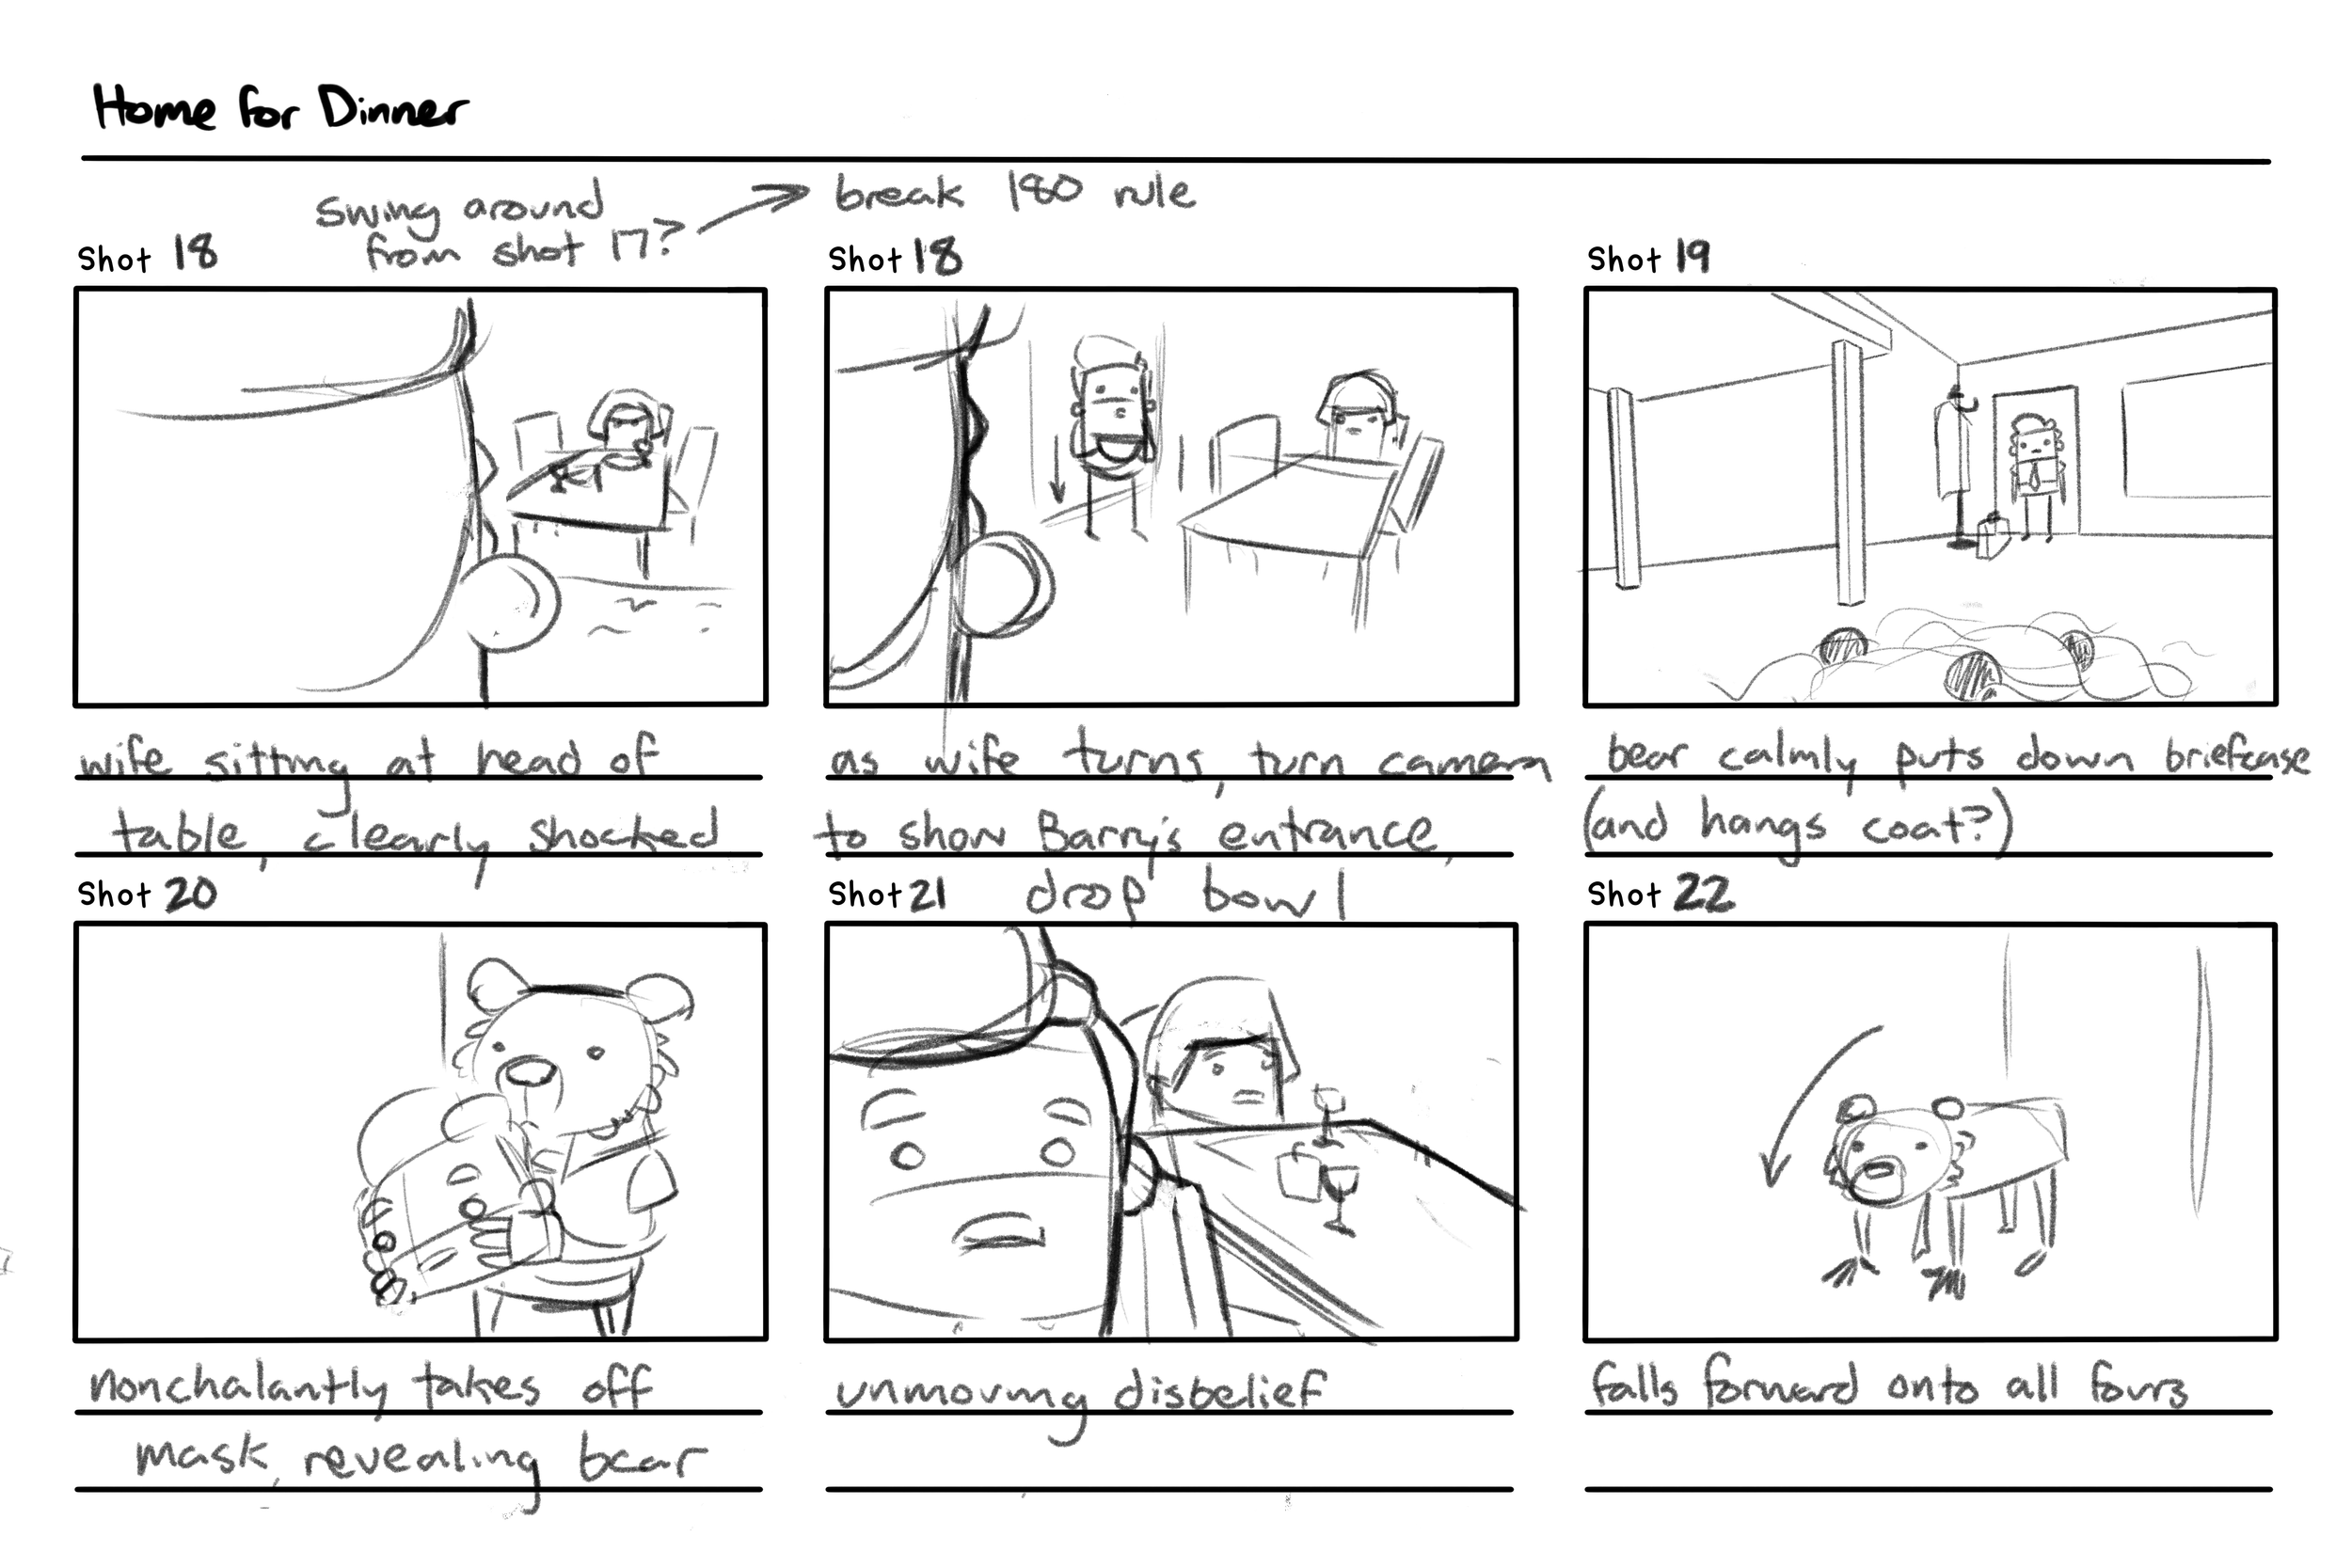 Home_For_Dinner_Storyboard-4.png